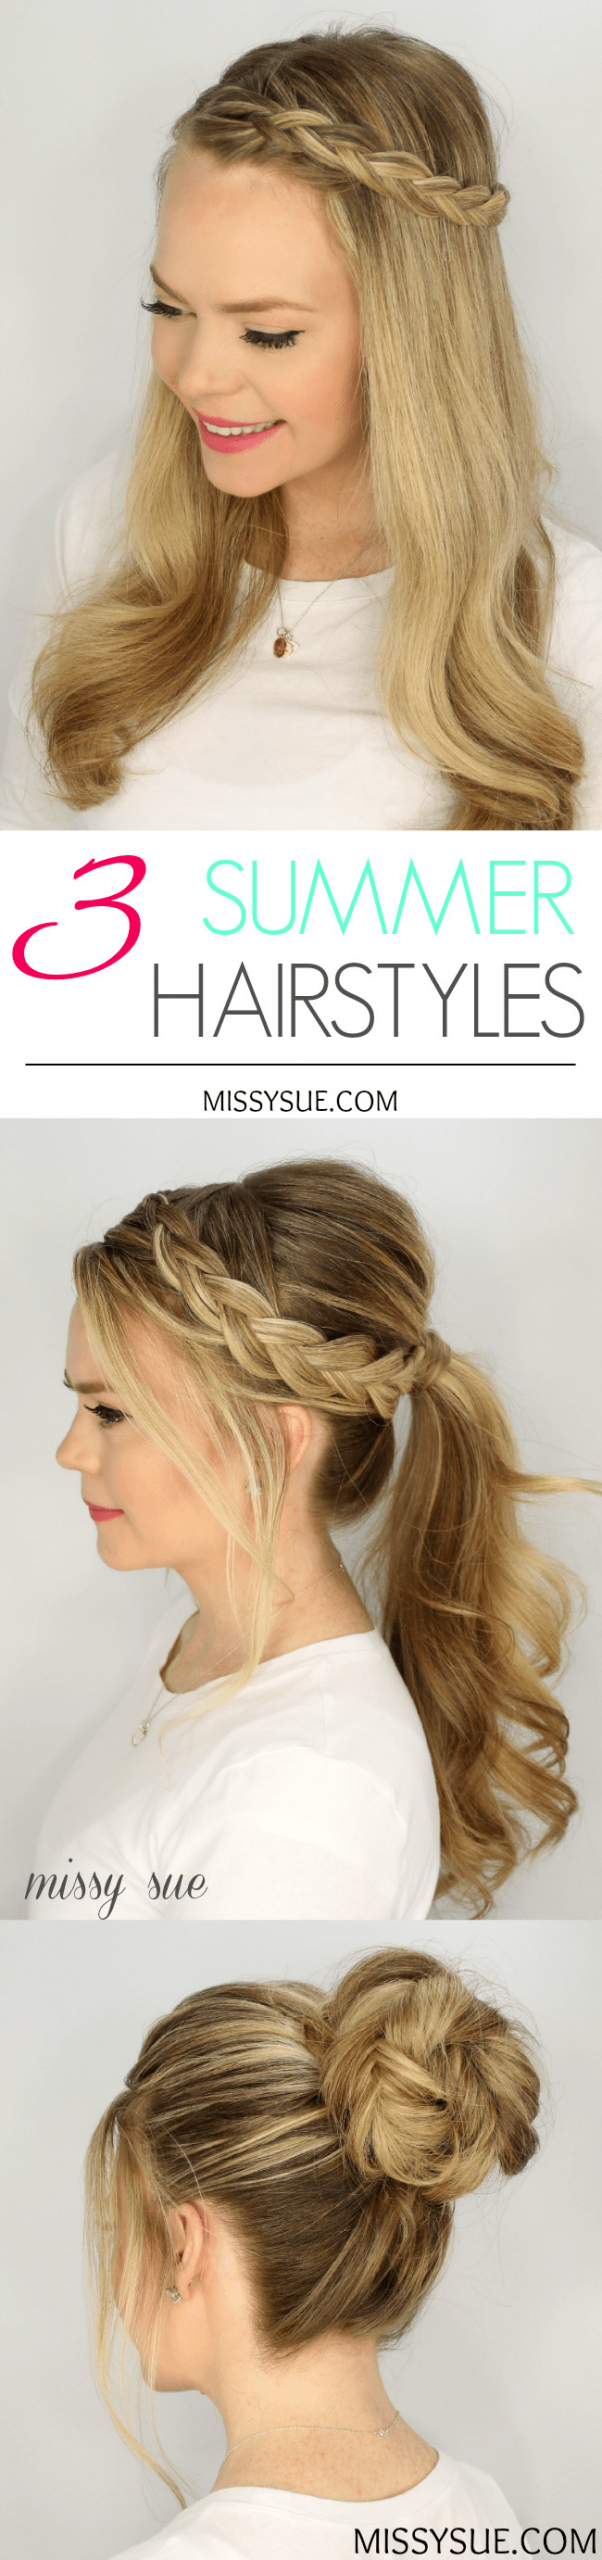 Easy Hairstyles For Summer
 3 Easy Summer Hairstyles